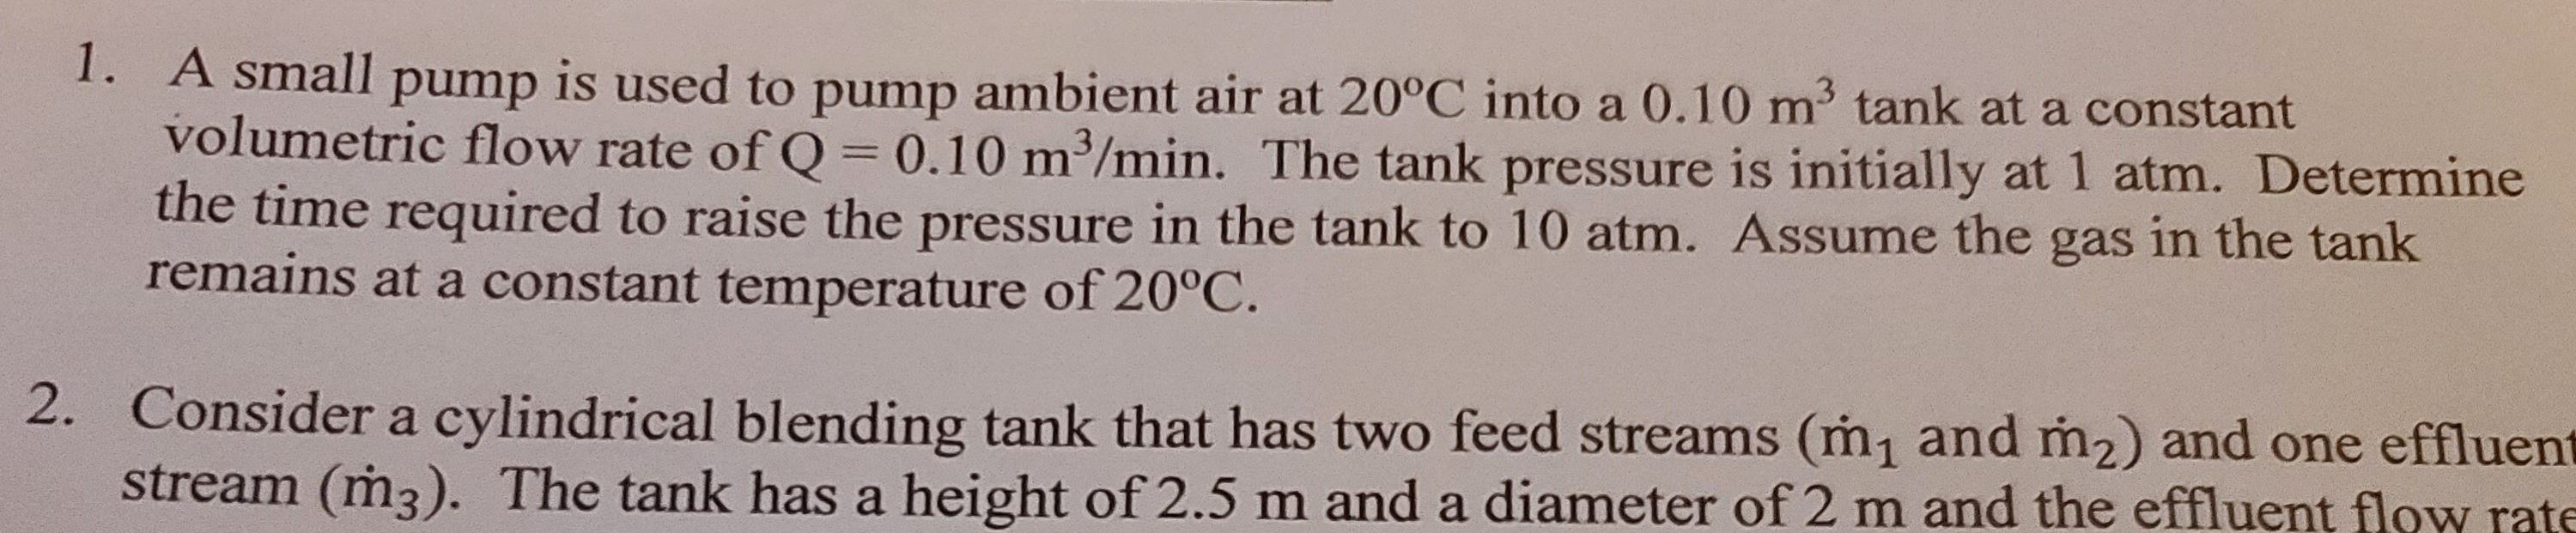 A small pump is used to pump ambient air at 20°C into a 0.10 m3 tank at a constant
volumetric flow rate of Q = 0.10 m3/min. The tank pressure is initially at 1 atm. Determine
the time required to raise the pressure in the tank to 10 atm. Assume the gas in the tank
remains at a constant temperature of 20°C.
%3D
